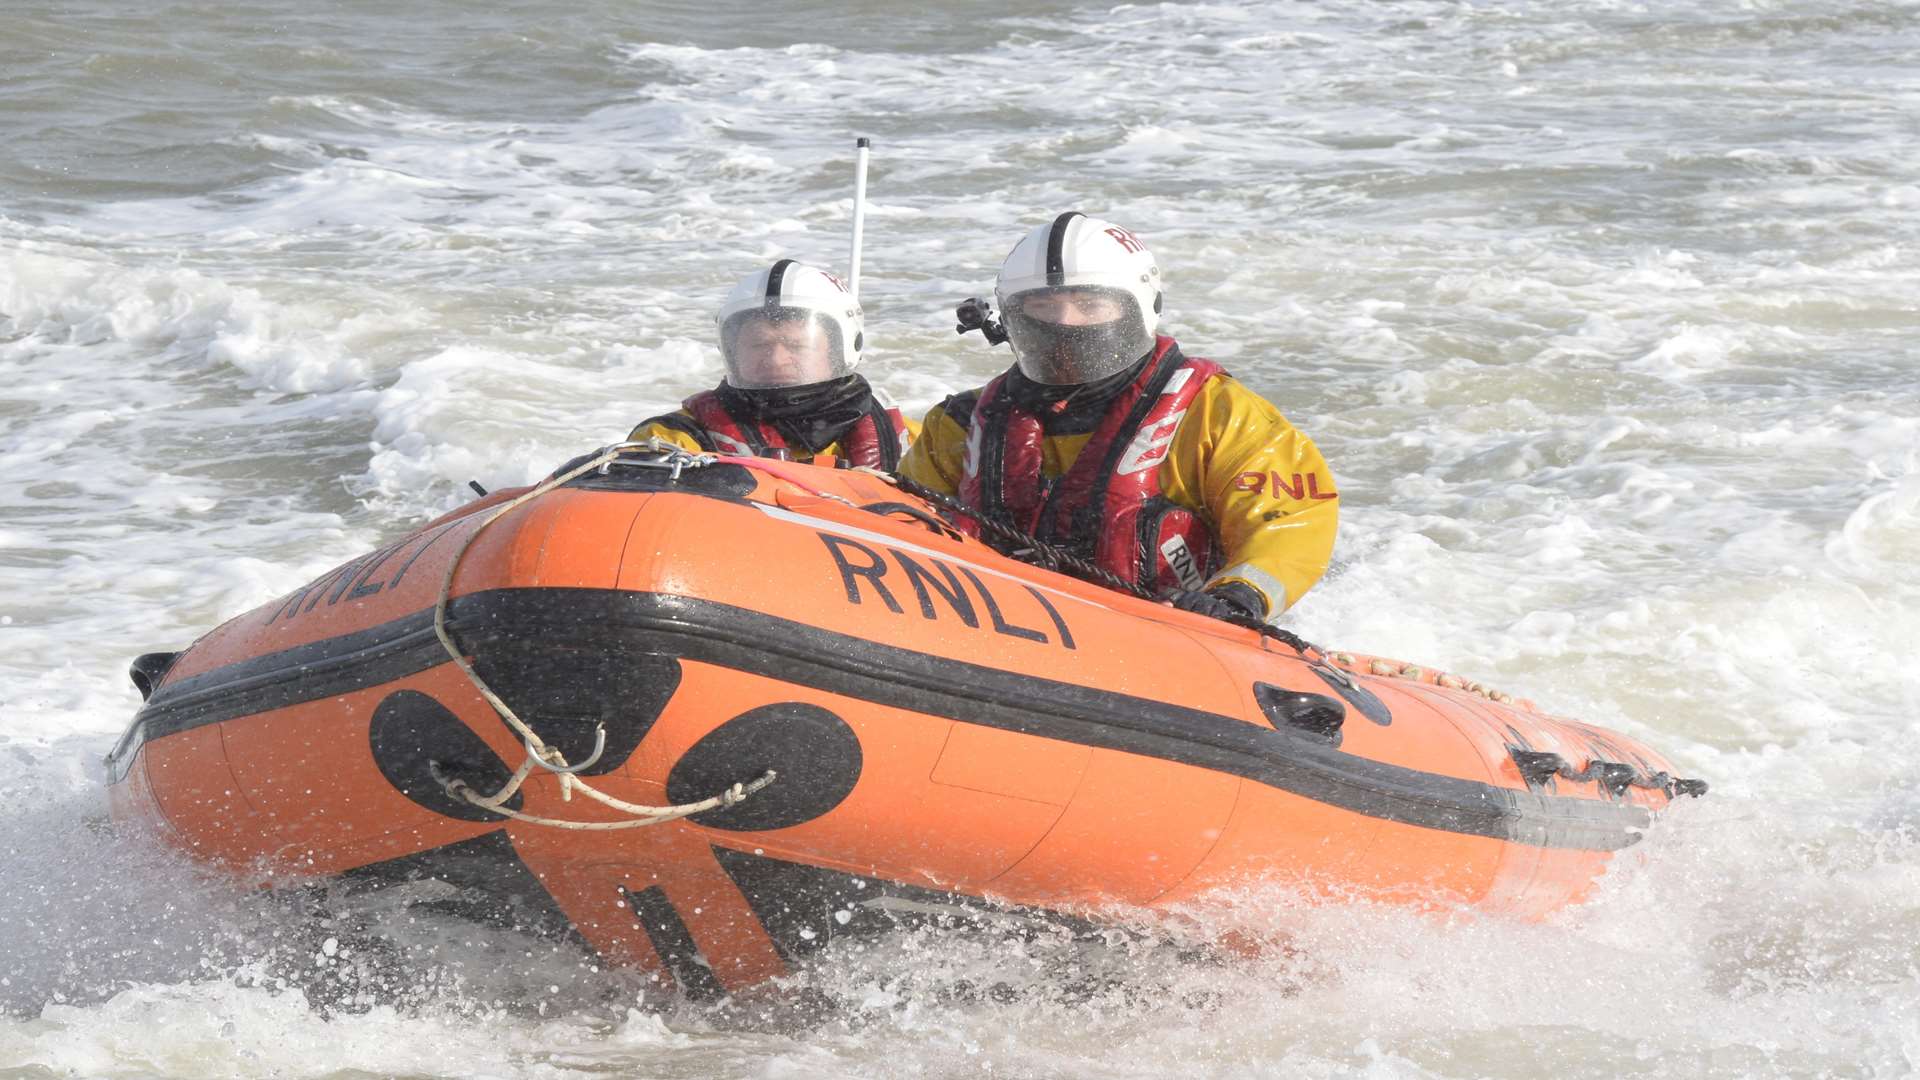 Gravesend RNLI was deployed to look for a person in distress.